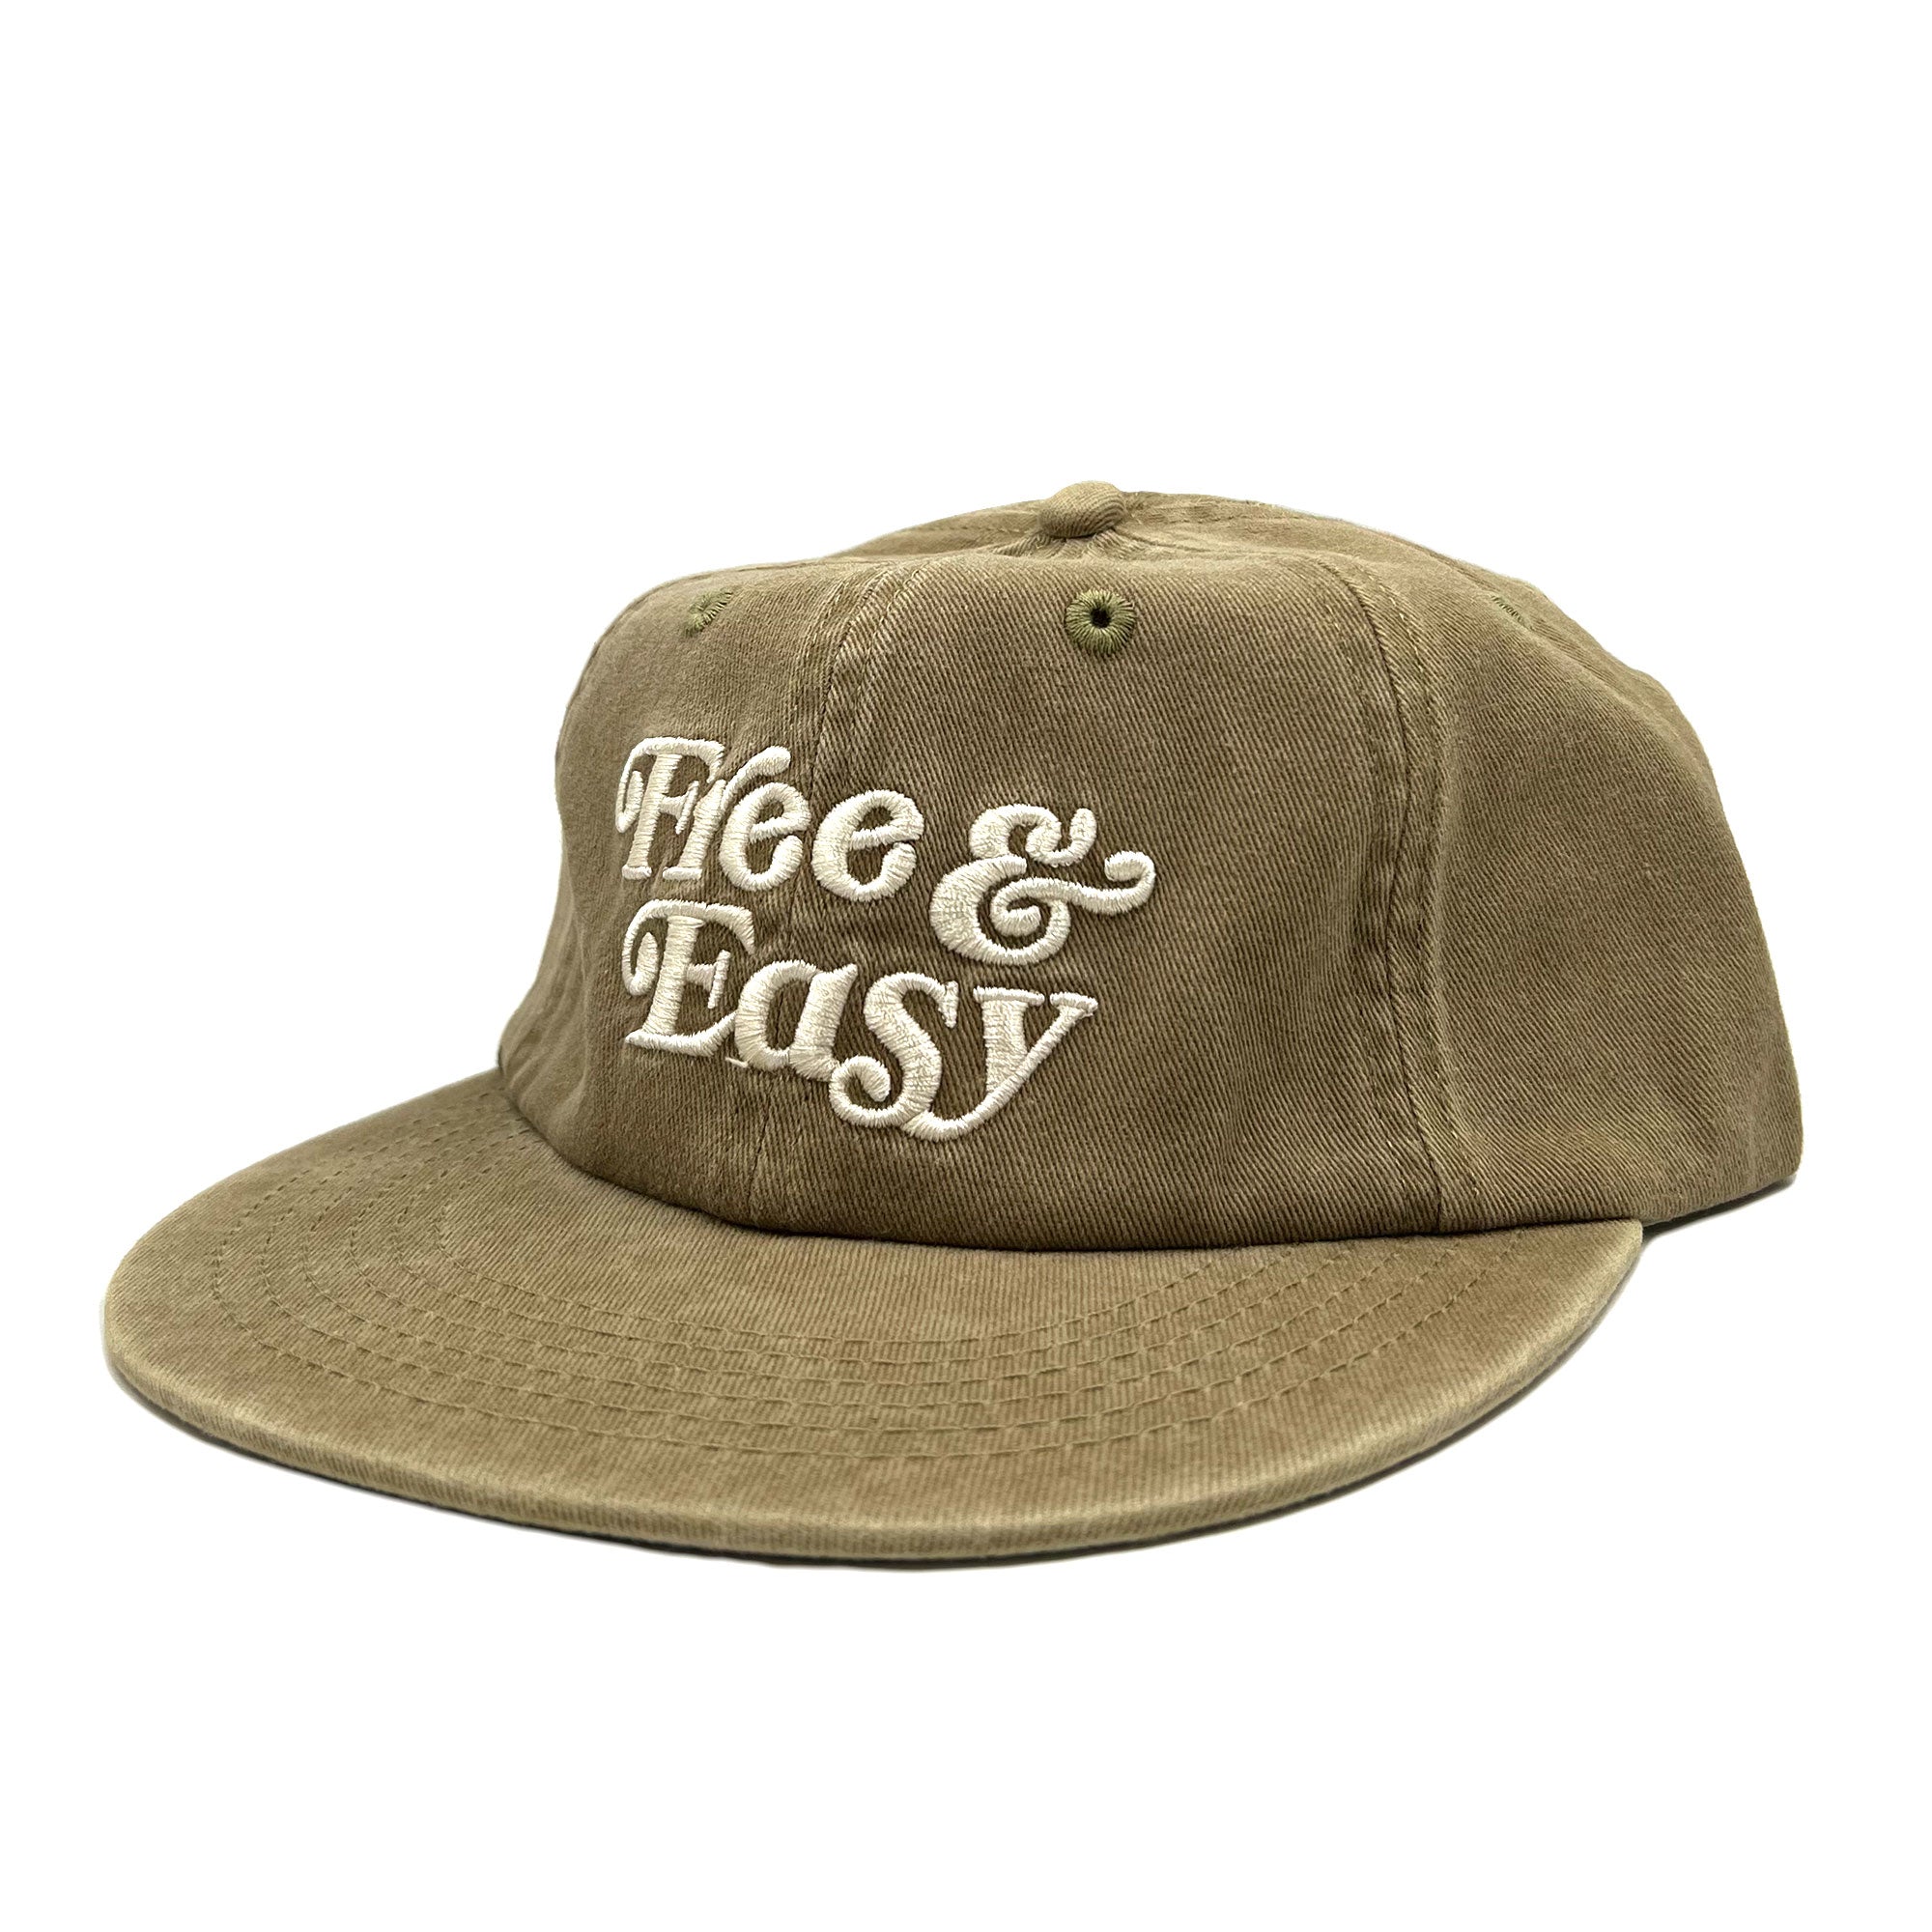 Free & Easy washed khaki hat with white embroidered Don't Trip logo on white background - Free & Easy